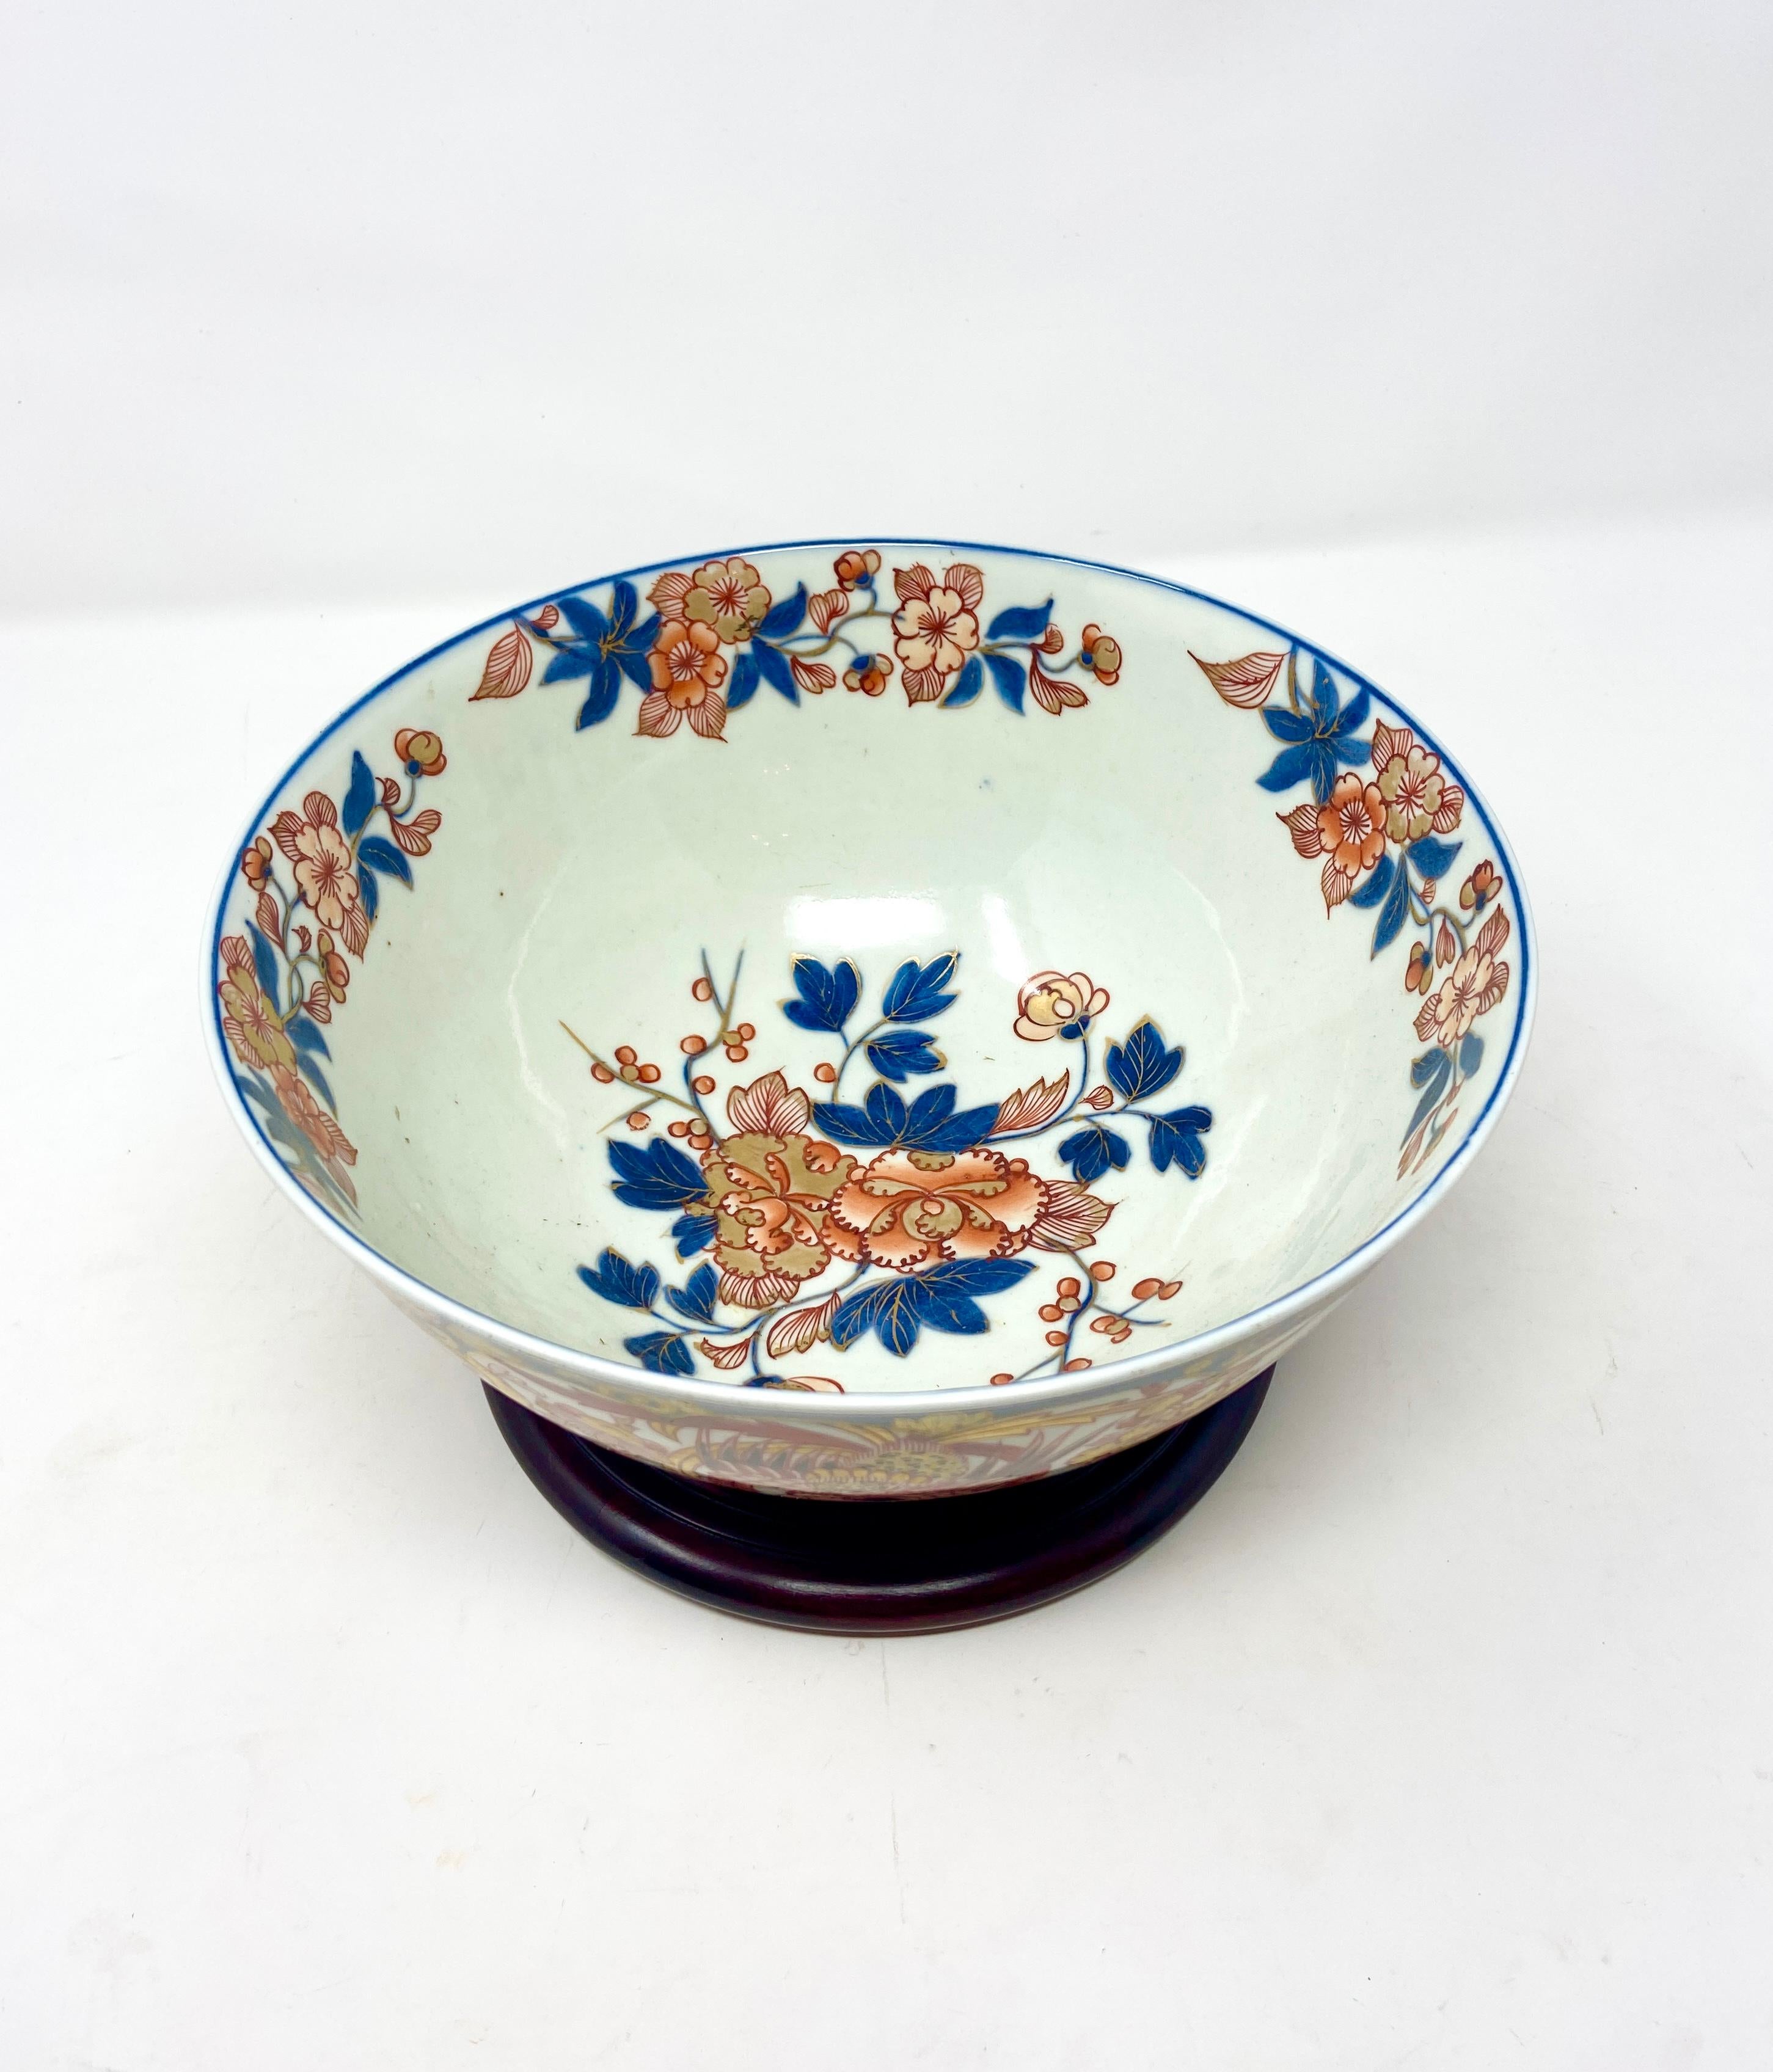 Antique Japanese Imari porcelain bowl on teakwood stand, Circa 1900.
Dimensions with stand: 
H: 6 inches 
D: 10 1/2 inches.